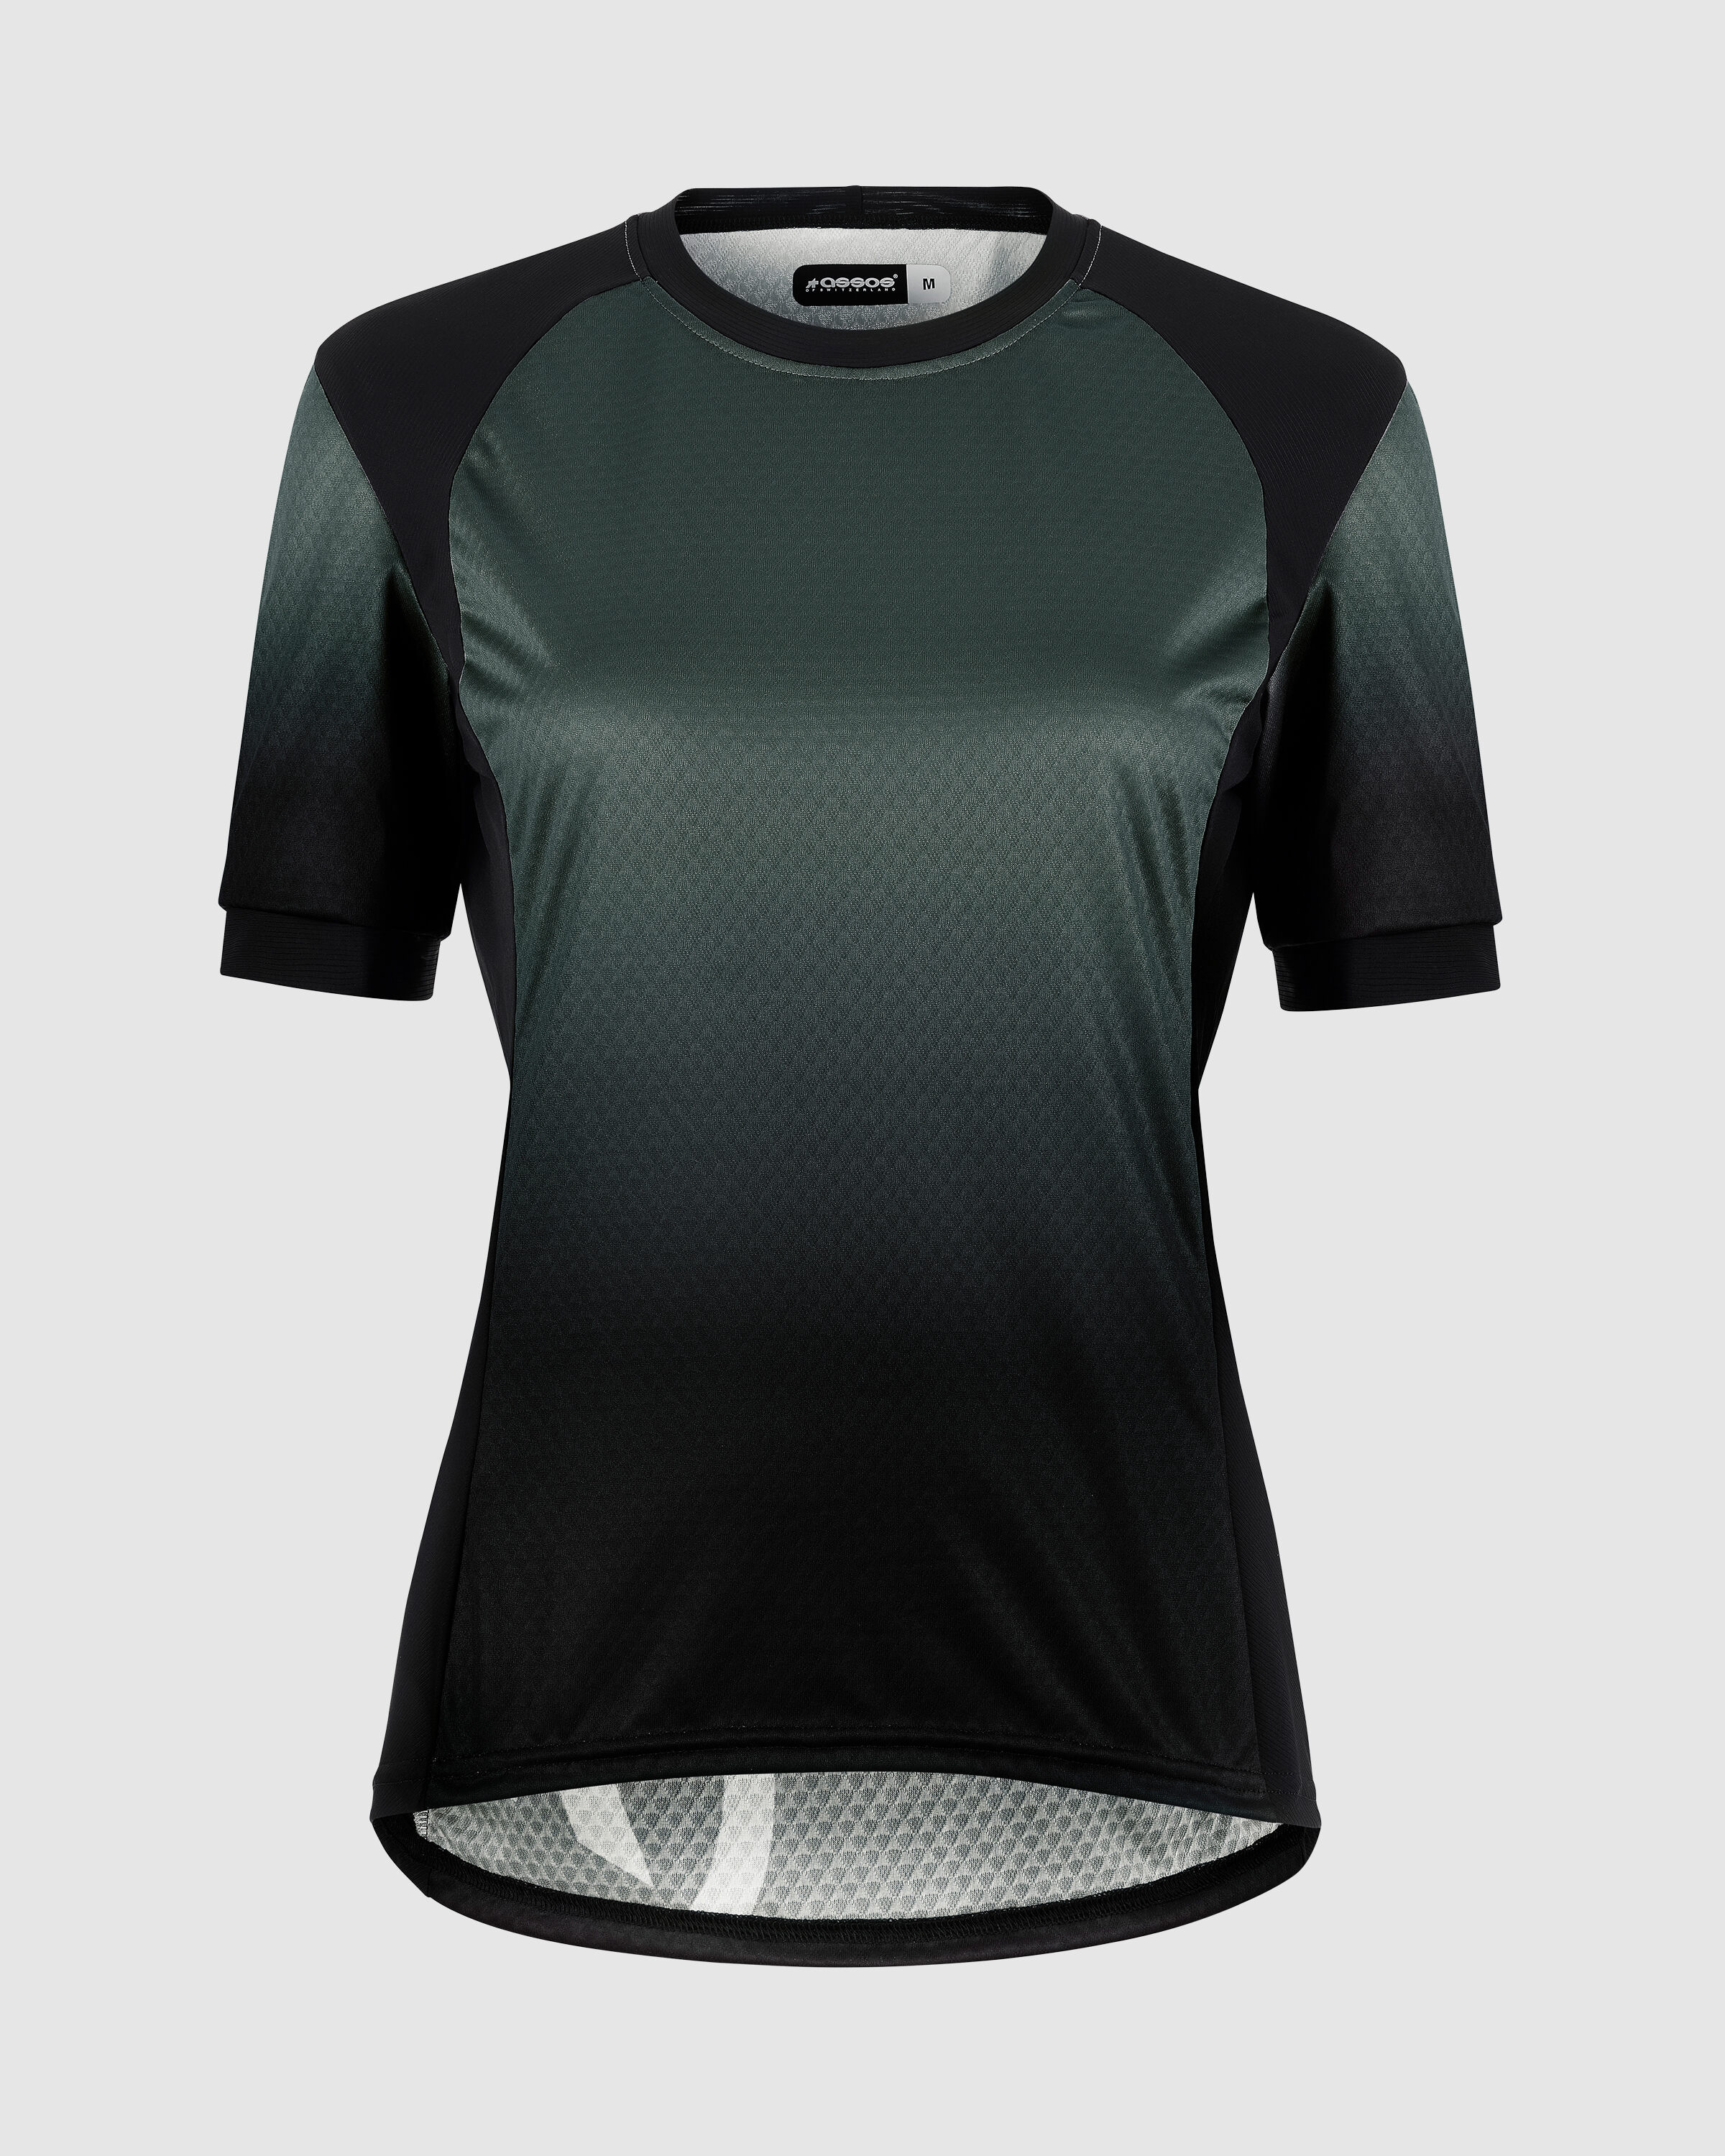 TRAIL Women's Jersey T3 - ASSOS Of Switzerland - Official Outlet